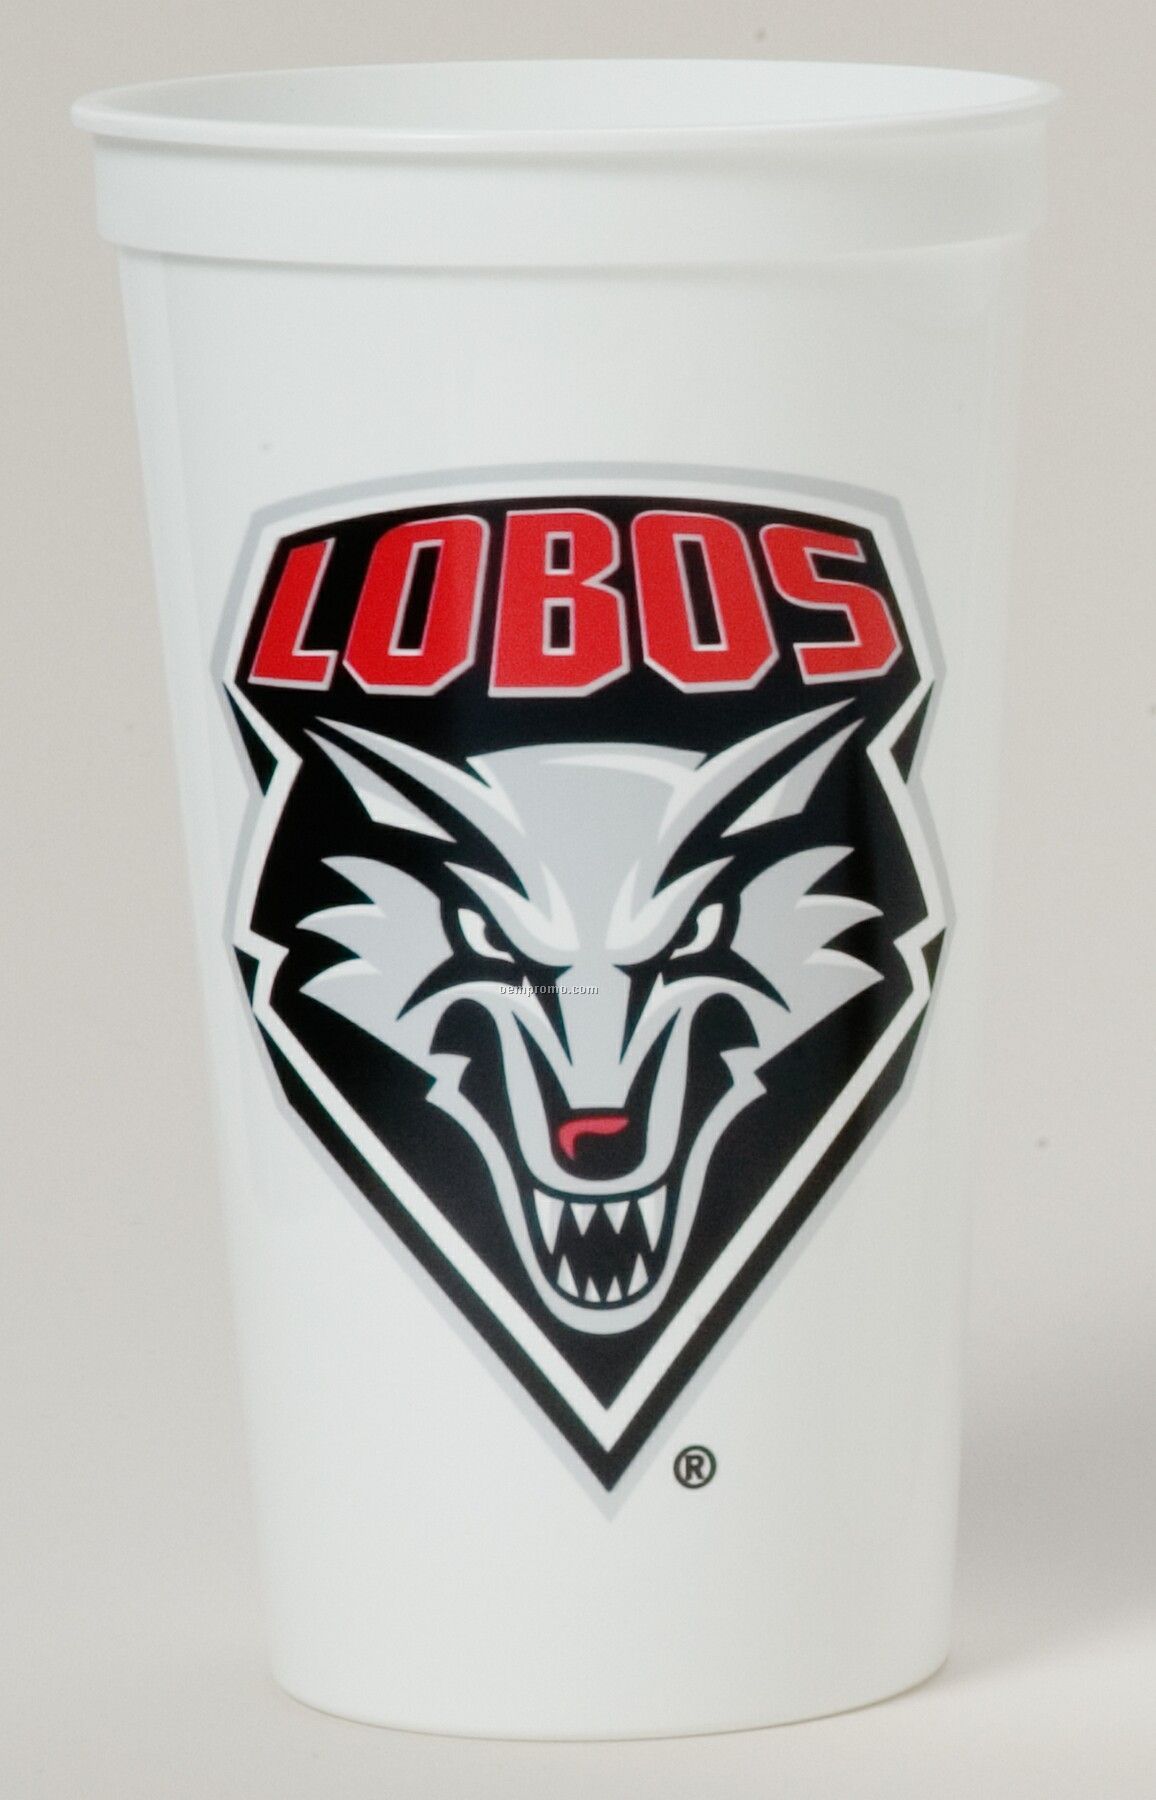 32 Oz. Smooth White Stadium Cup (4 Color Offset Imprint)